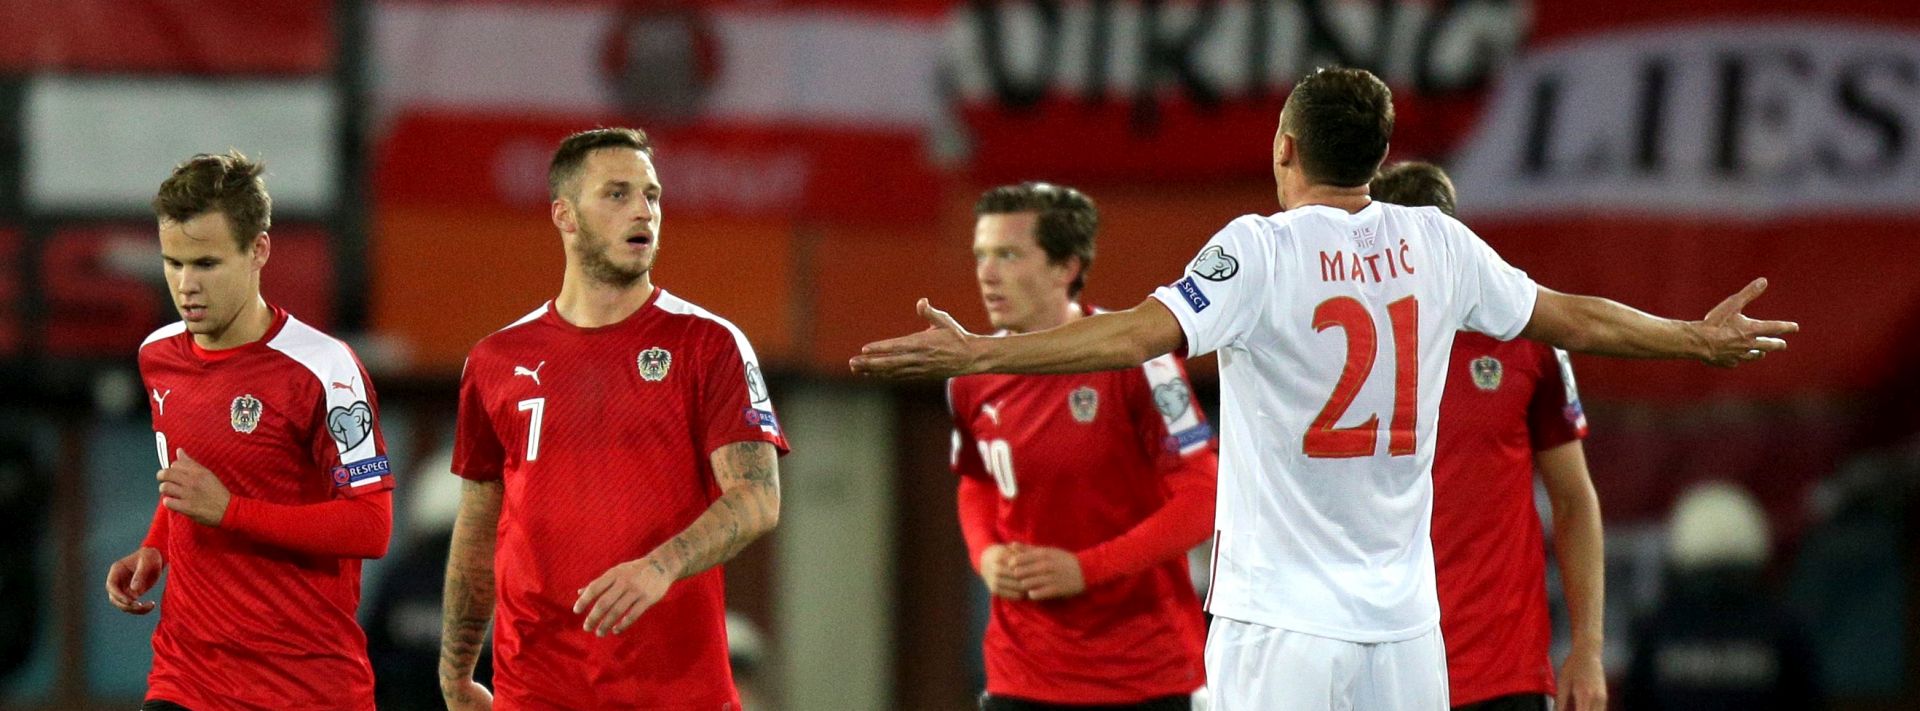 epa06249168 Nemanja Matic (R) of Serbia reacts after Marko Arnautovic (2-L) of Austria scored a goal during the FIFA World Cup 2018 Group D qualifying soccer match between Austria and Serbia at the Ernst Happel Stadium in Vienna, Austria, 06 October 2017.  EPA/LISI NIESNER